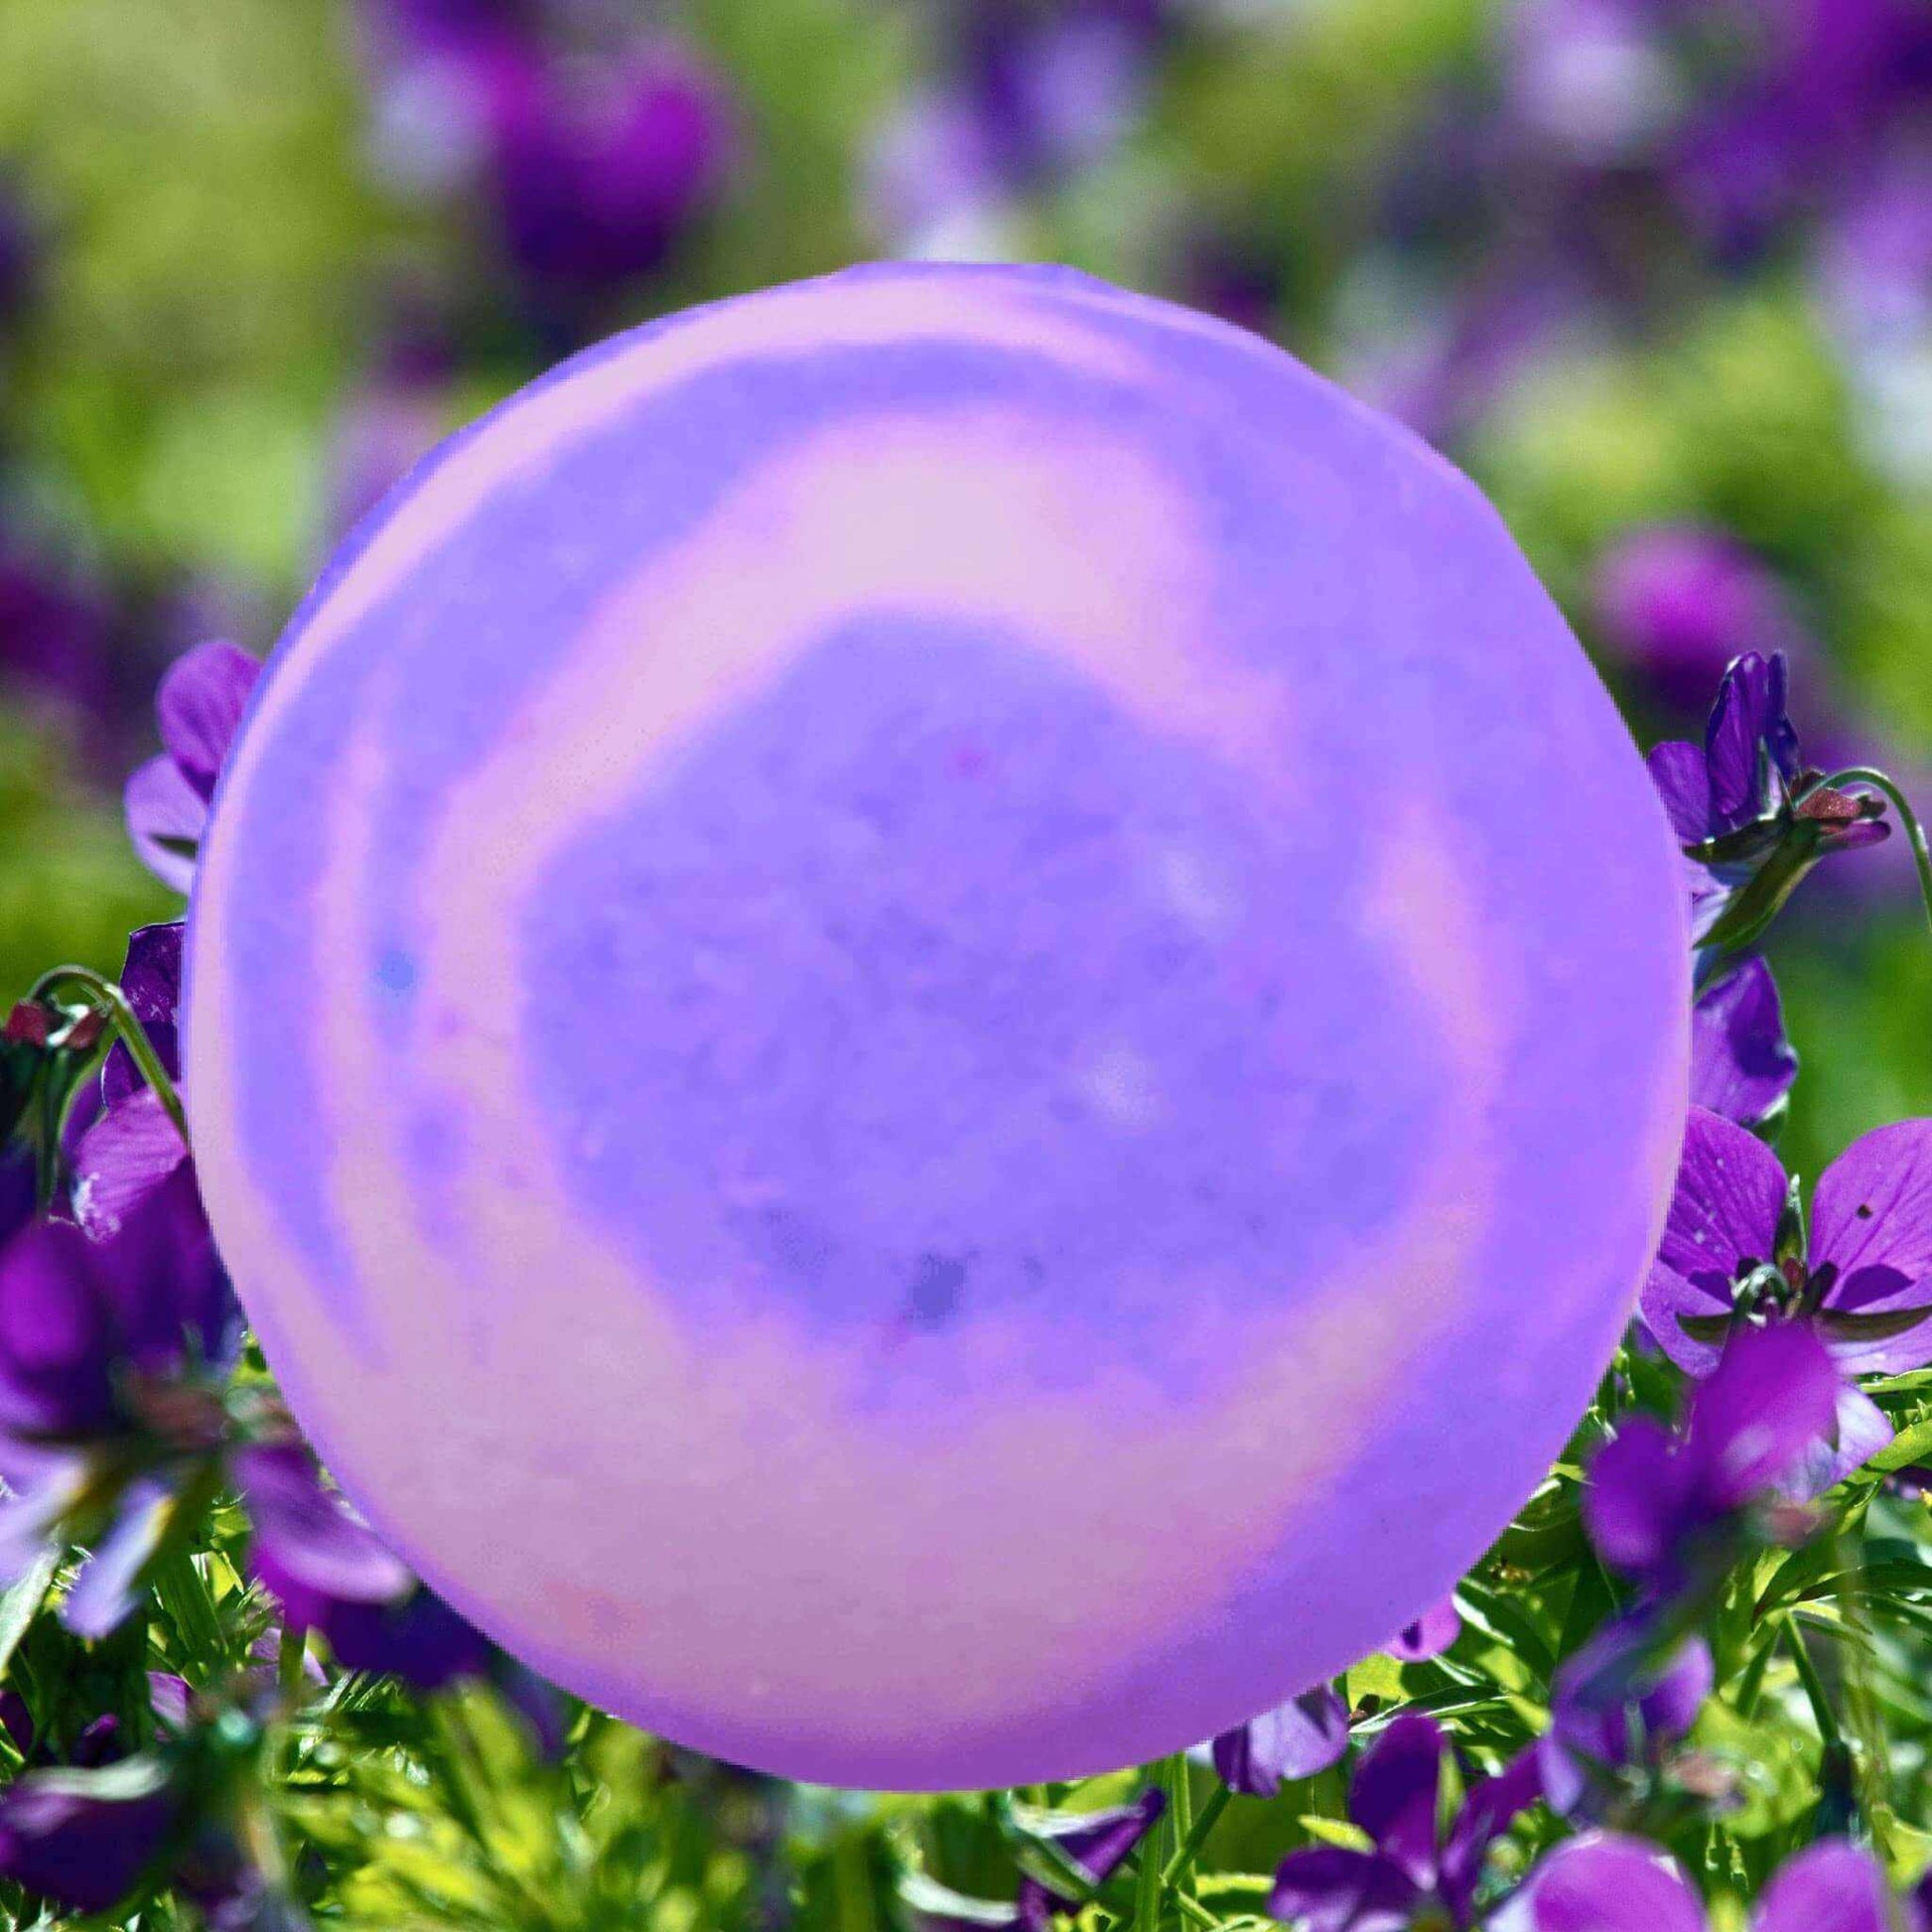 Experience the intoxicating scent of Parma Violet with our Victorian Fizzy Bath Bomb. A royal treat for your senses!